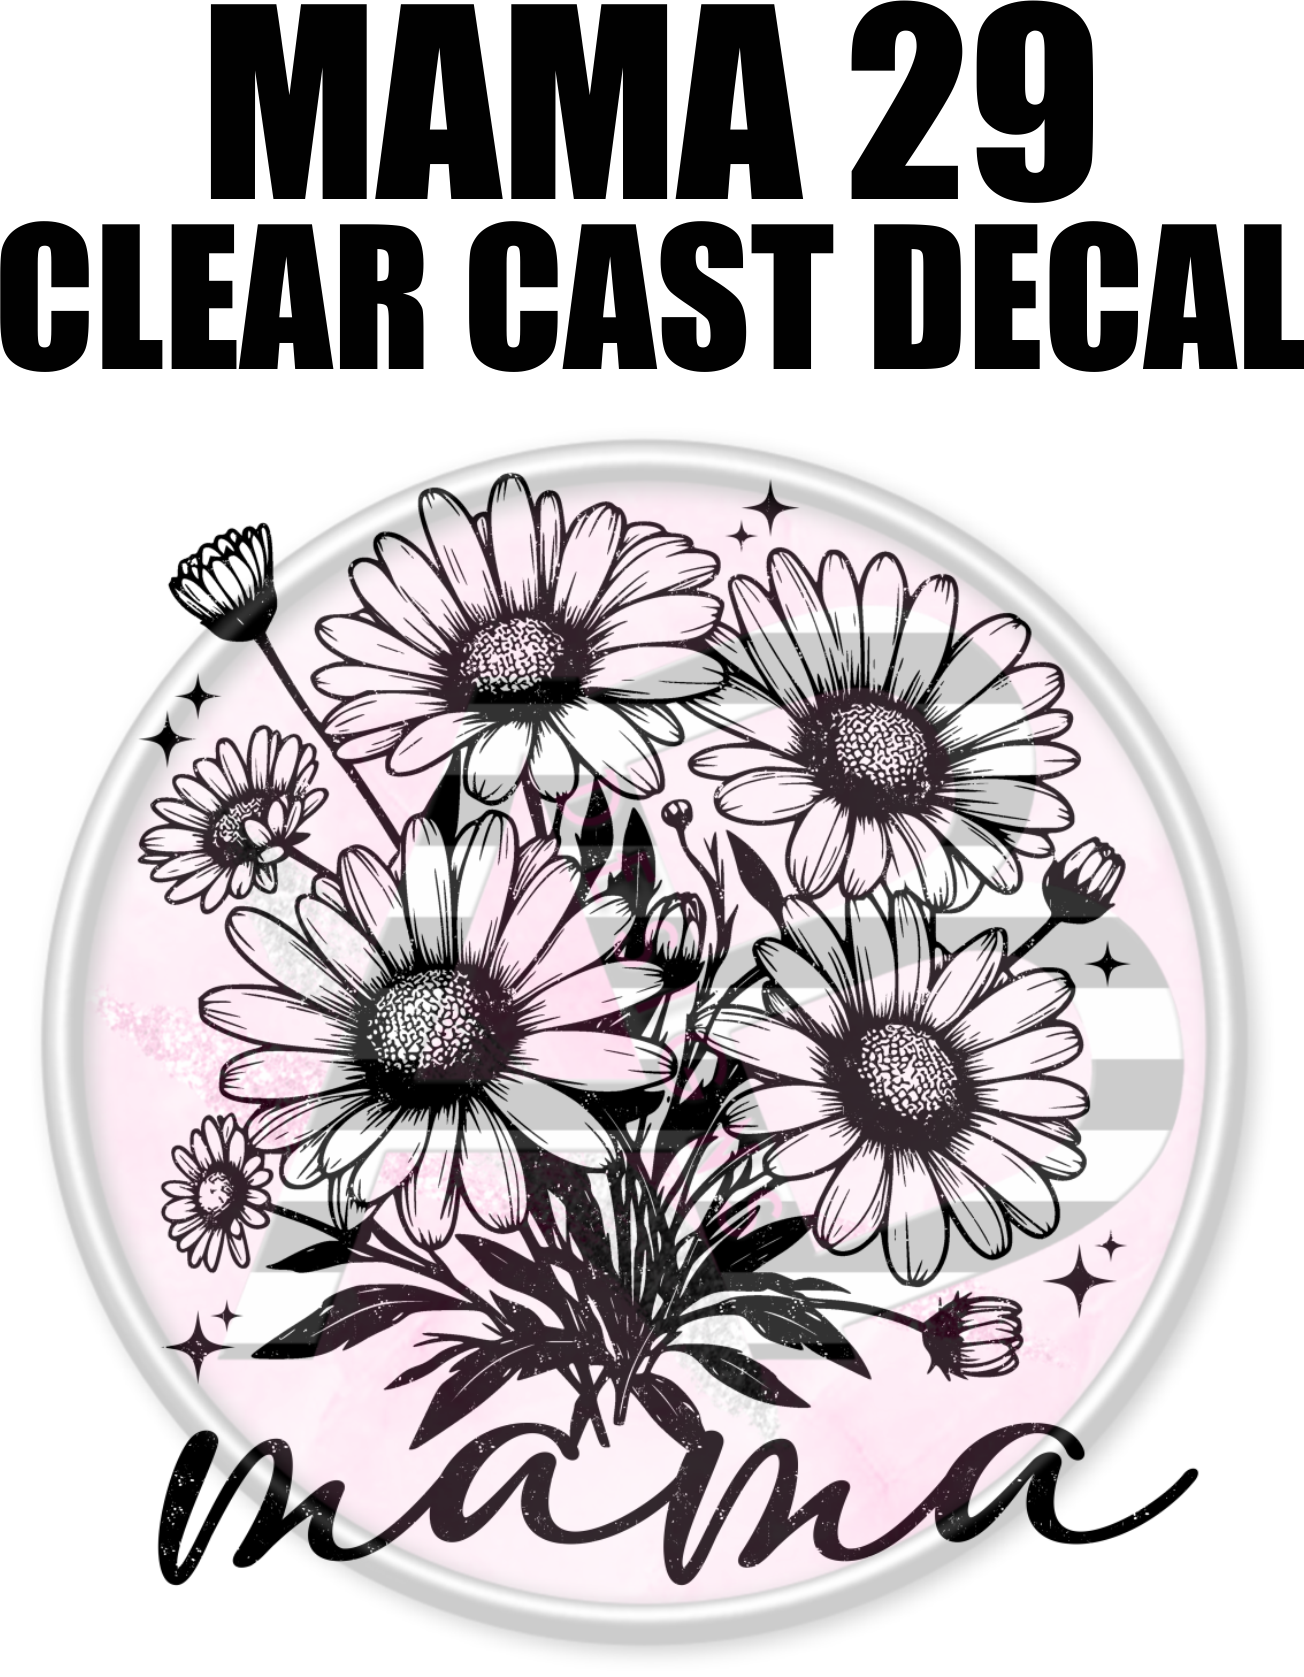 Mama 29 - Clear Cast Decal-554